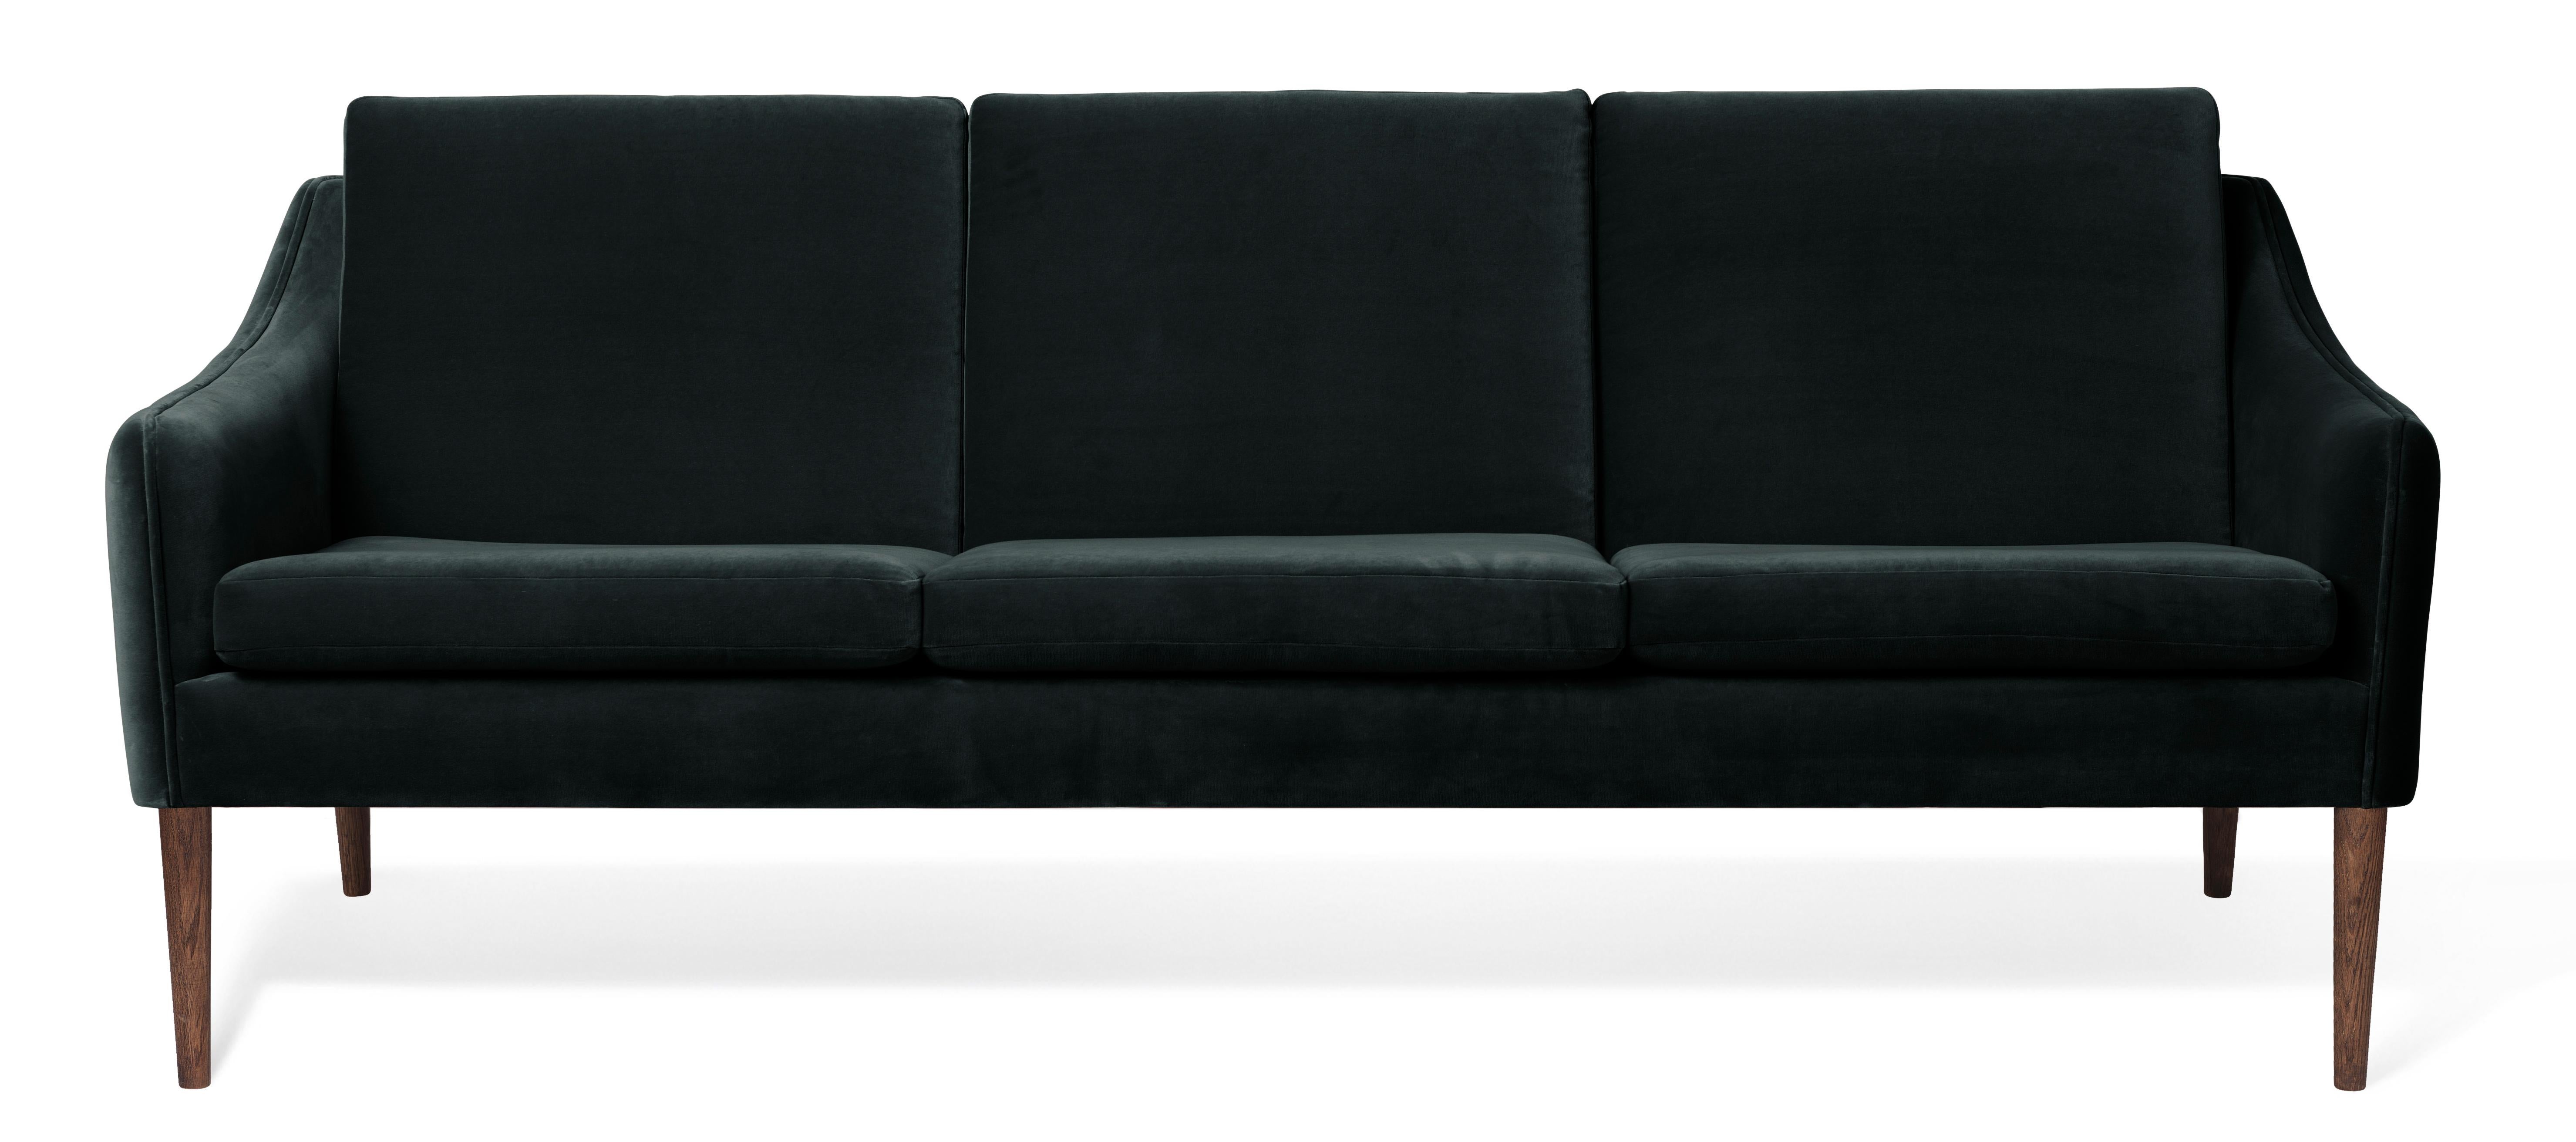 For Sale: Green (Ritz 0705) Mr. Olsen 3-Seat Sofa with Smoked Oak Legs, by Hans Olsen from Warm Nordic